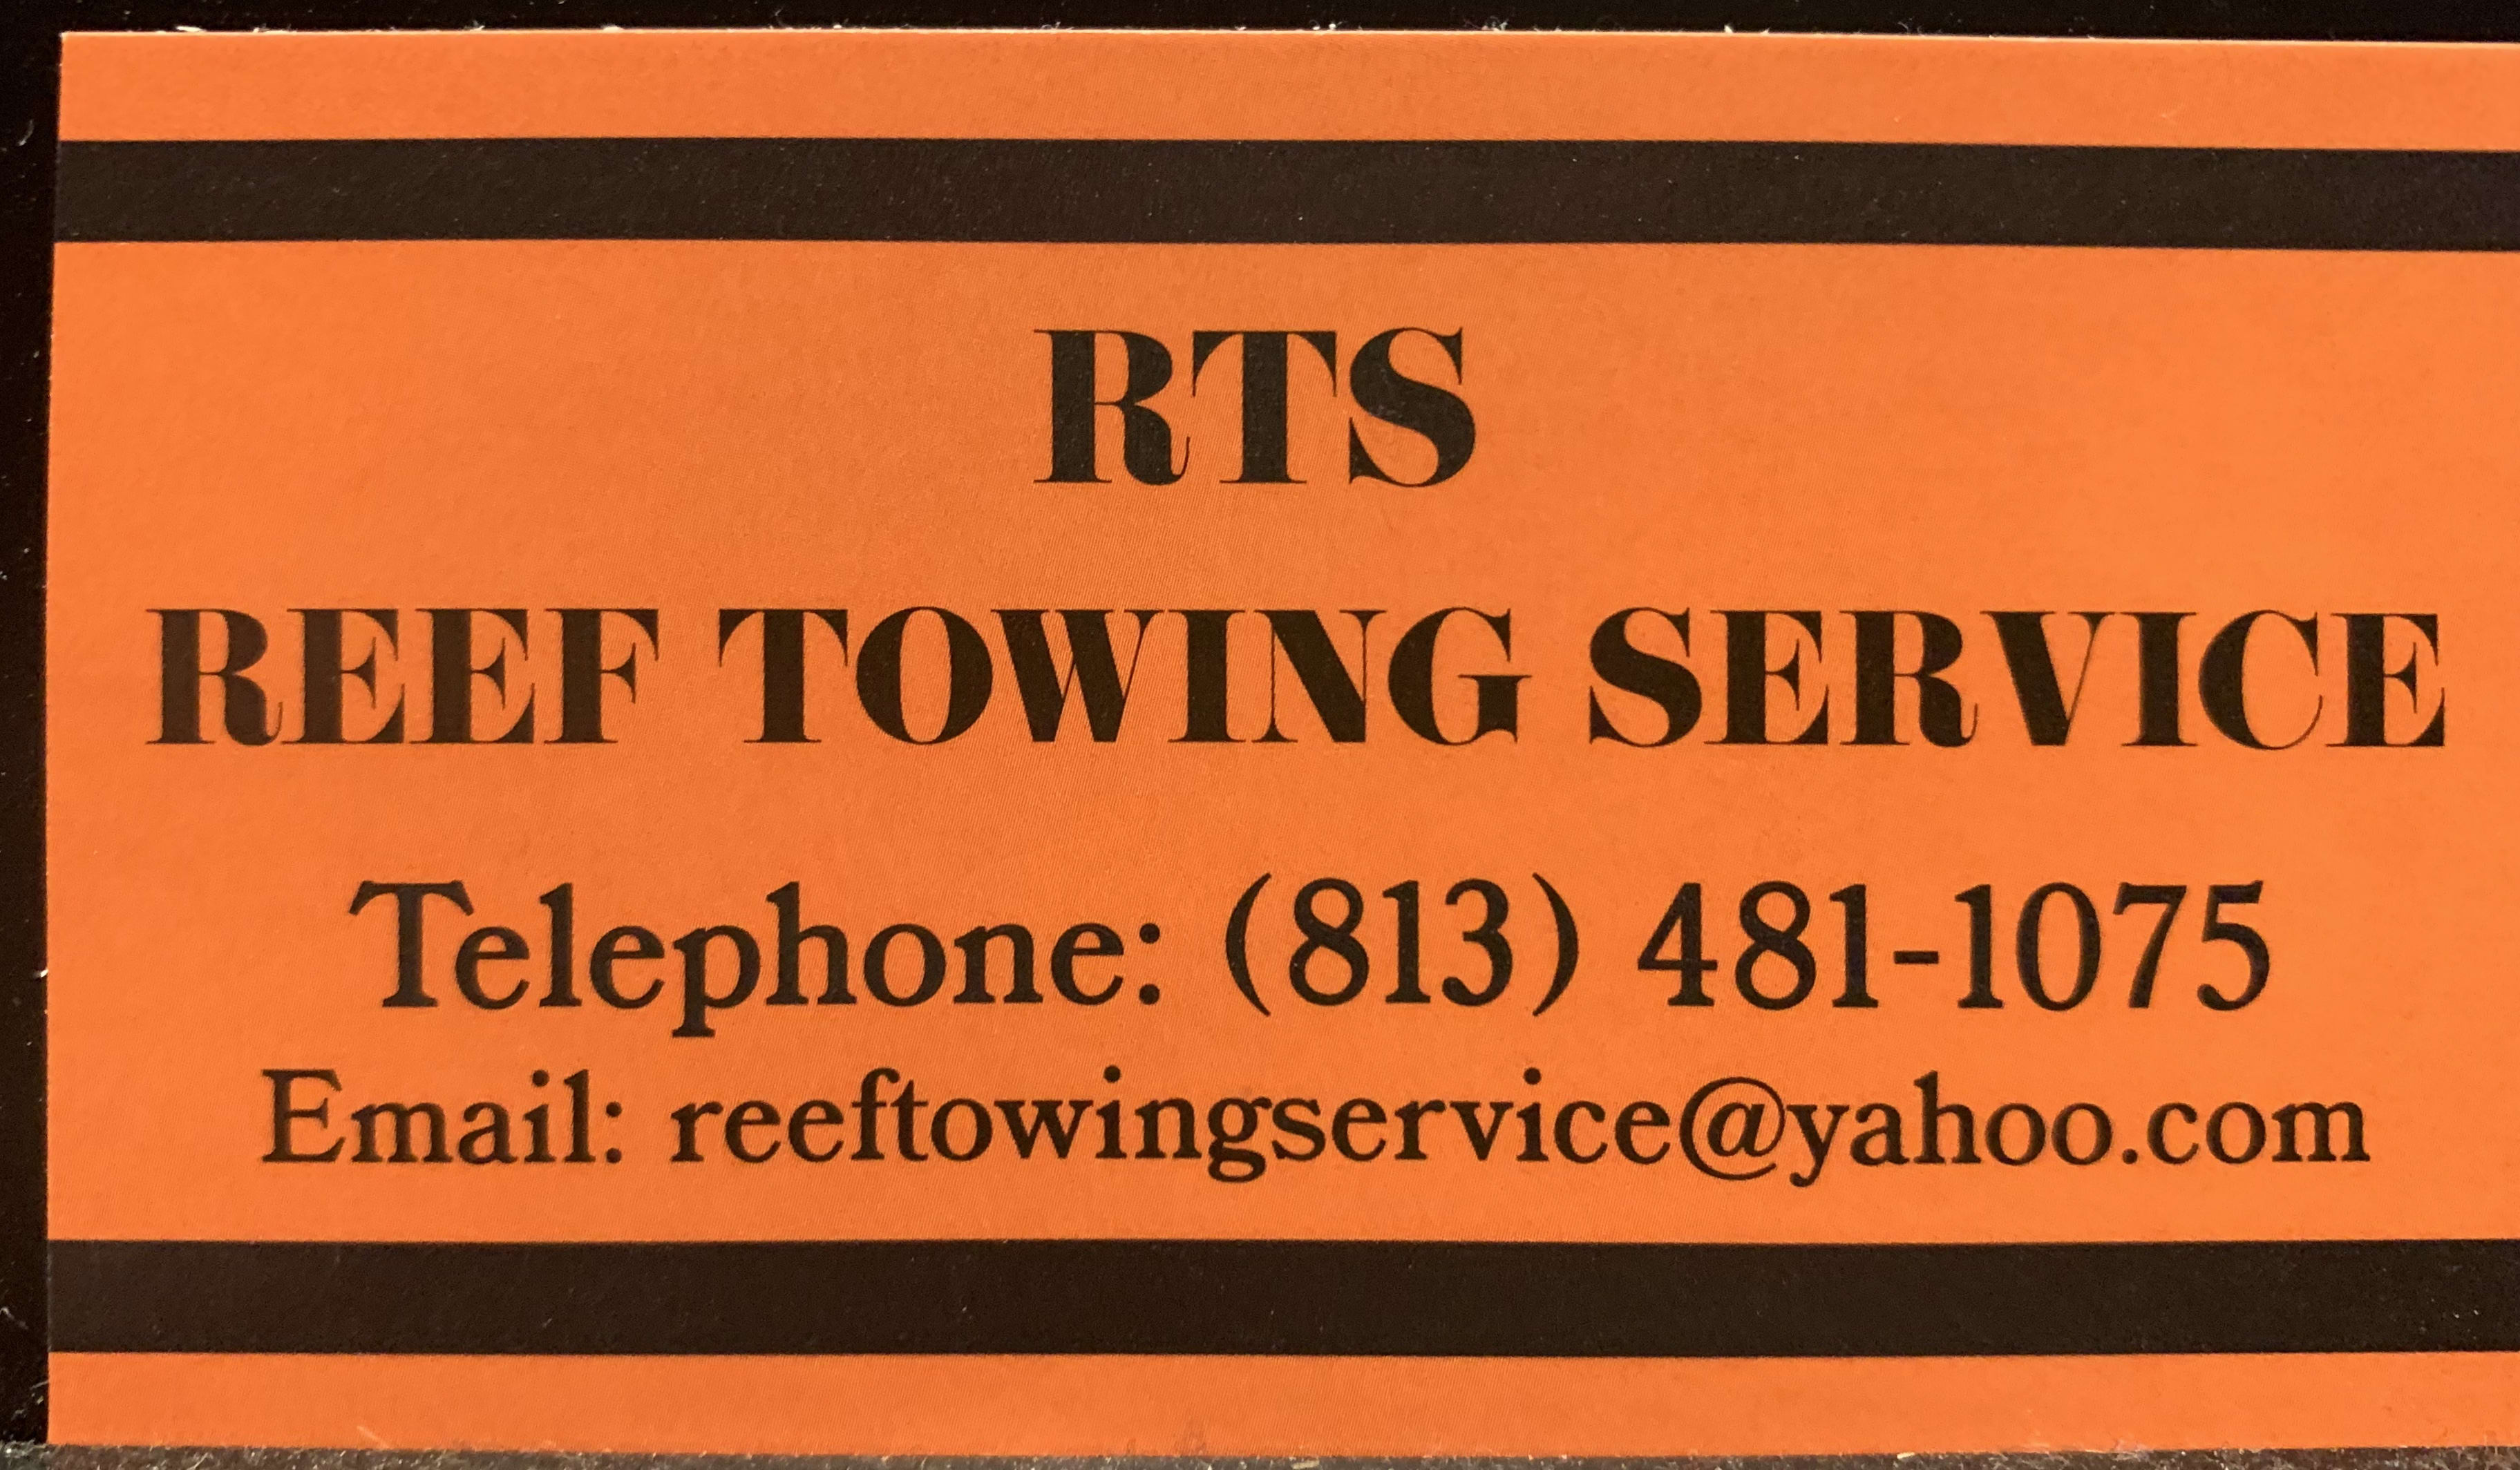 Reef Towing Service